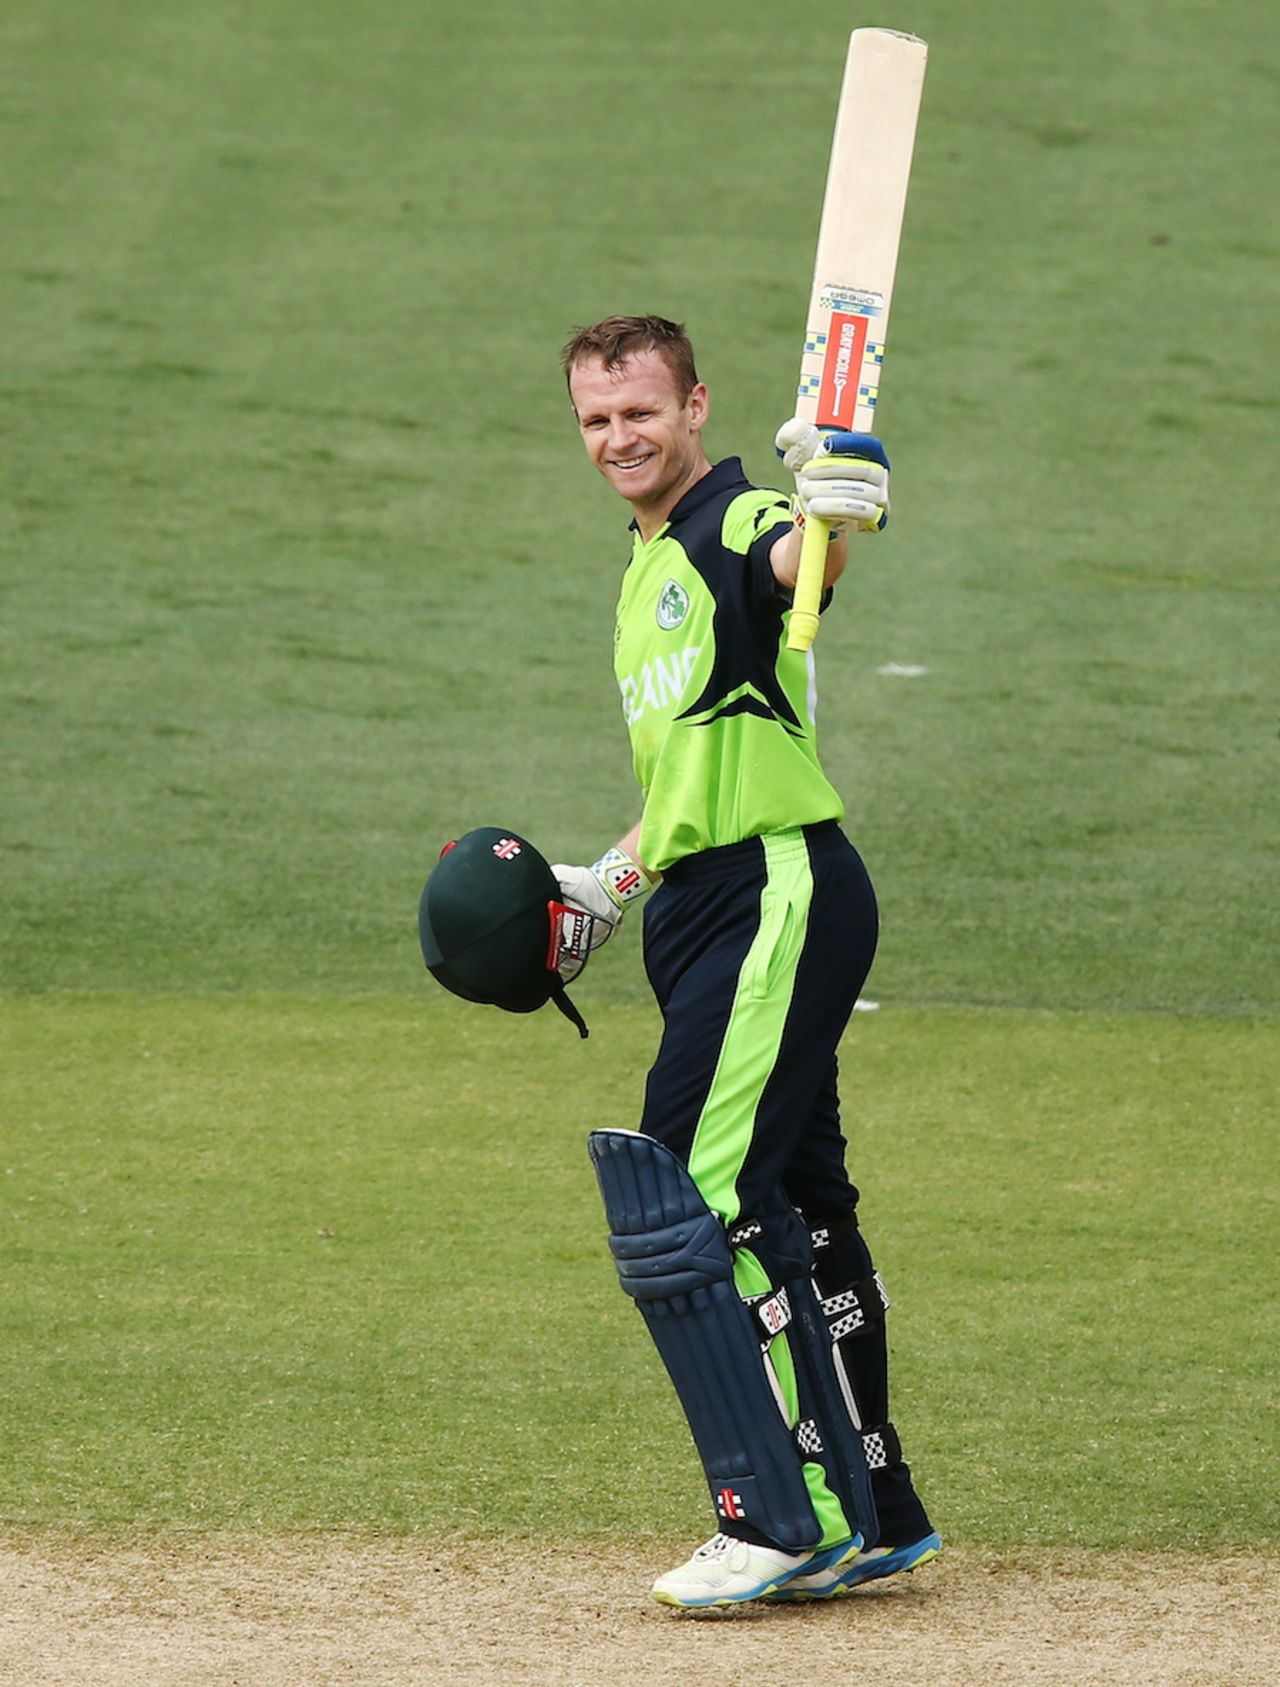 William Porterfield celebrates his seventh hundred, Ireland v Pakistan, World Cup 2015, Group B, Adelaide, March 15, 2015